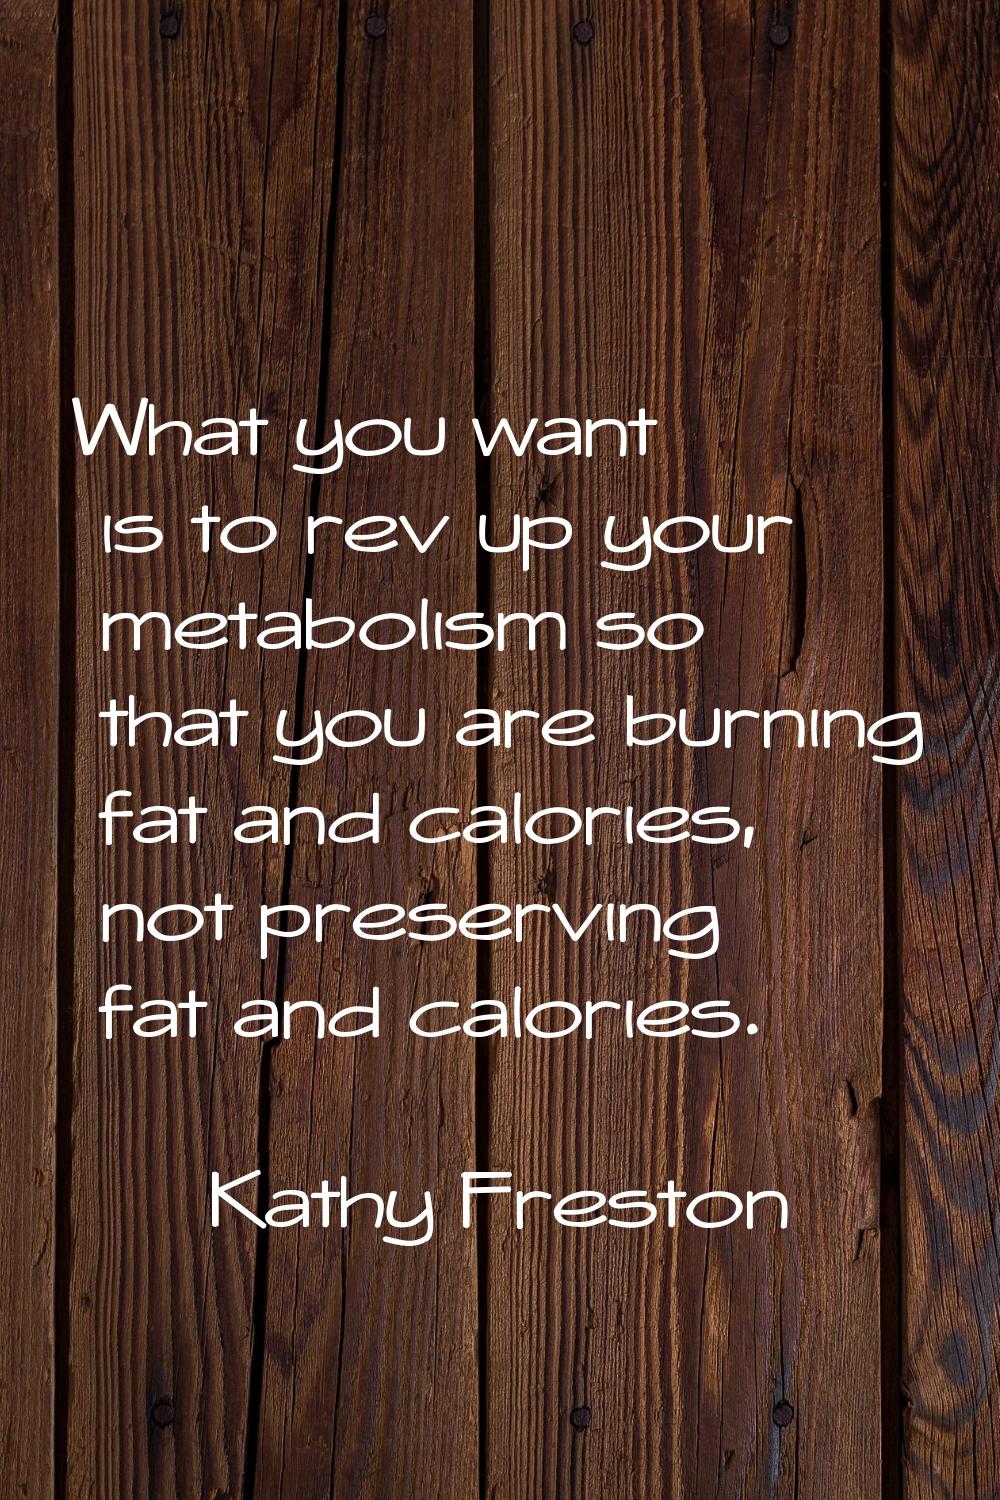 What you want is to rev up your metabolism so that you are burning fat and calories, not preserving